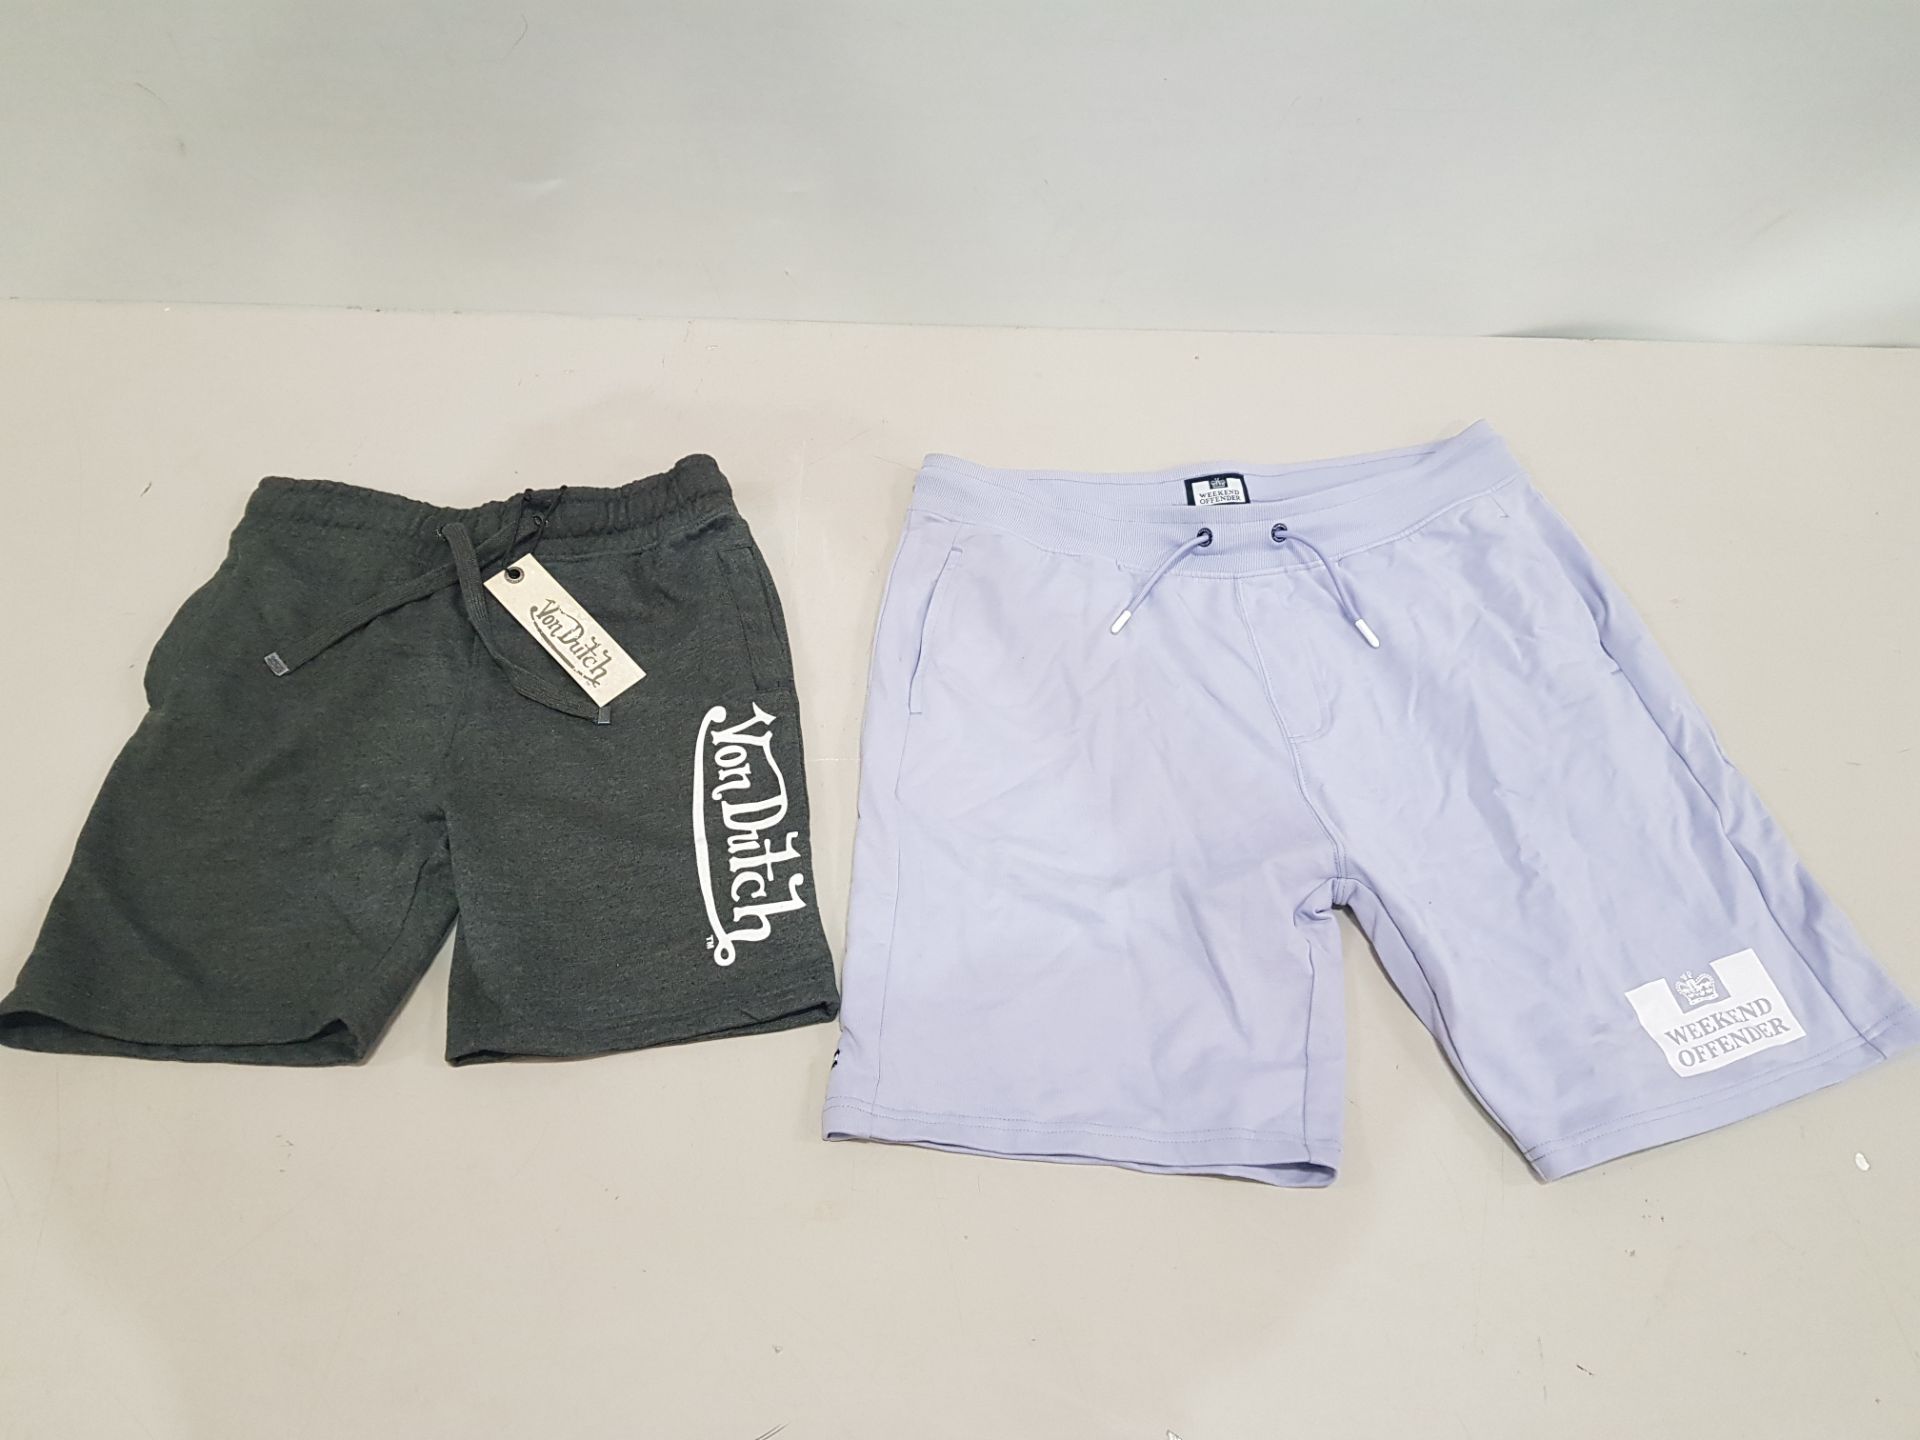 11 X PIECE MIXED LOT CONTAINING 7 VON DUTCH JOGGERS SHORTS SIZE SMALL , 4 WEEKEND OFFENDER MEN'S